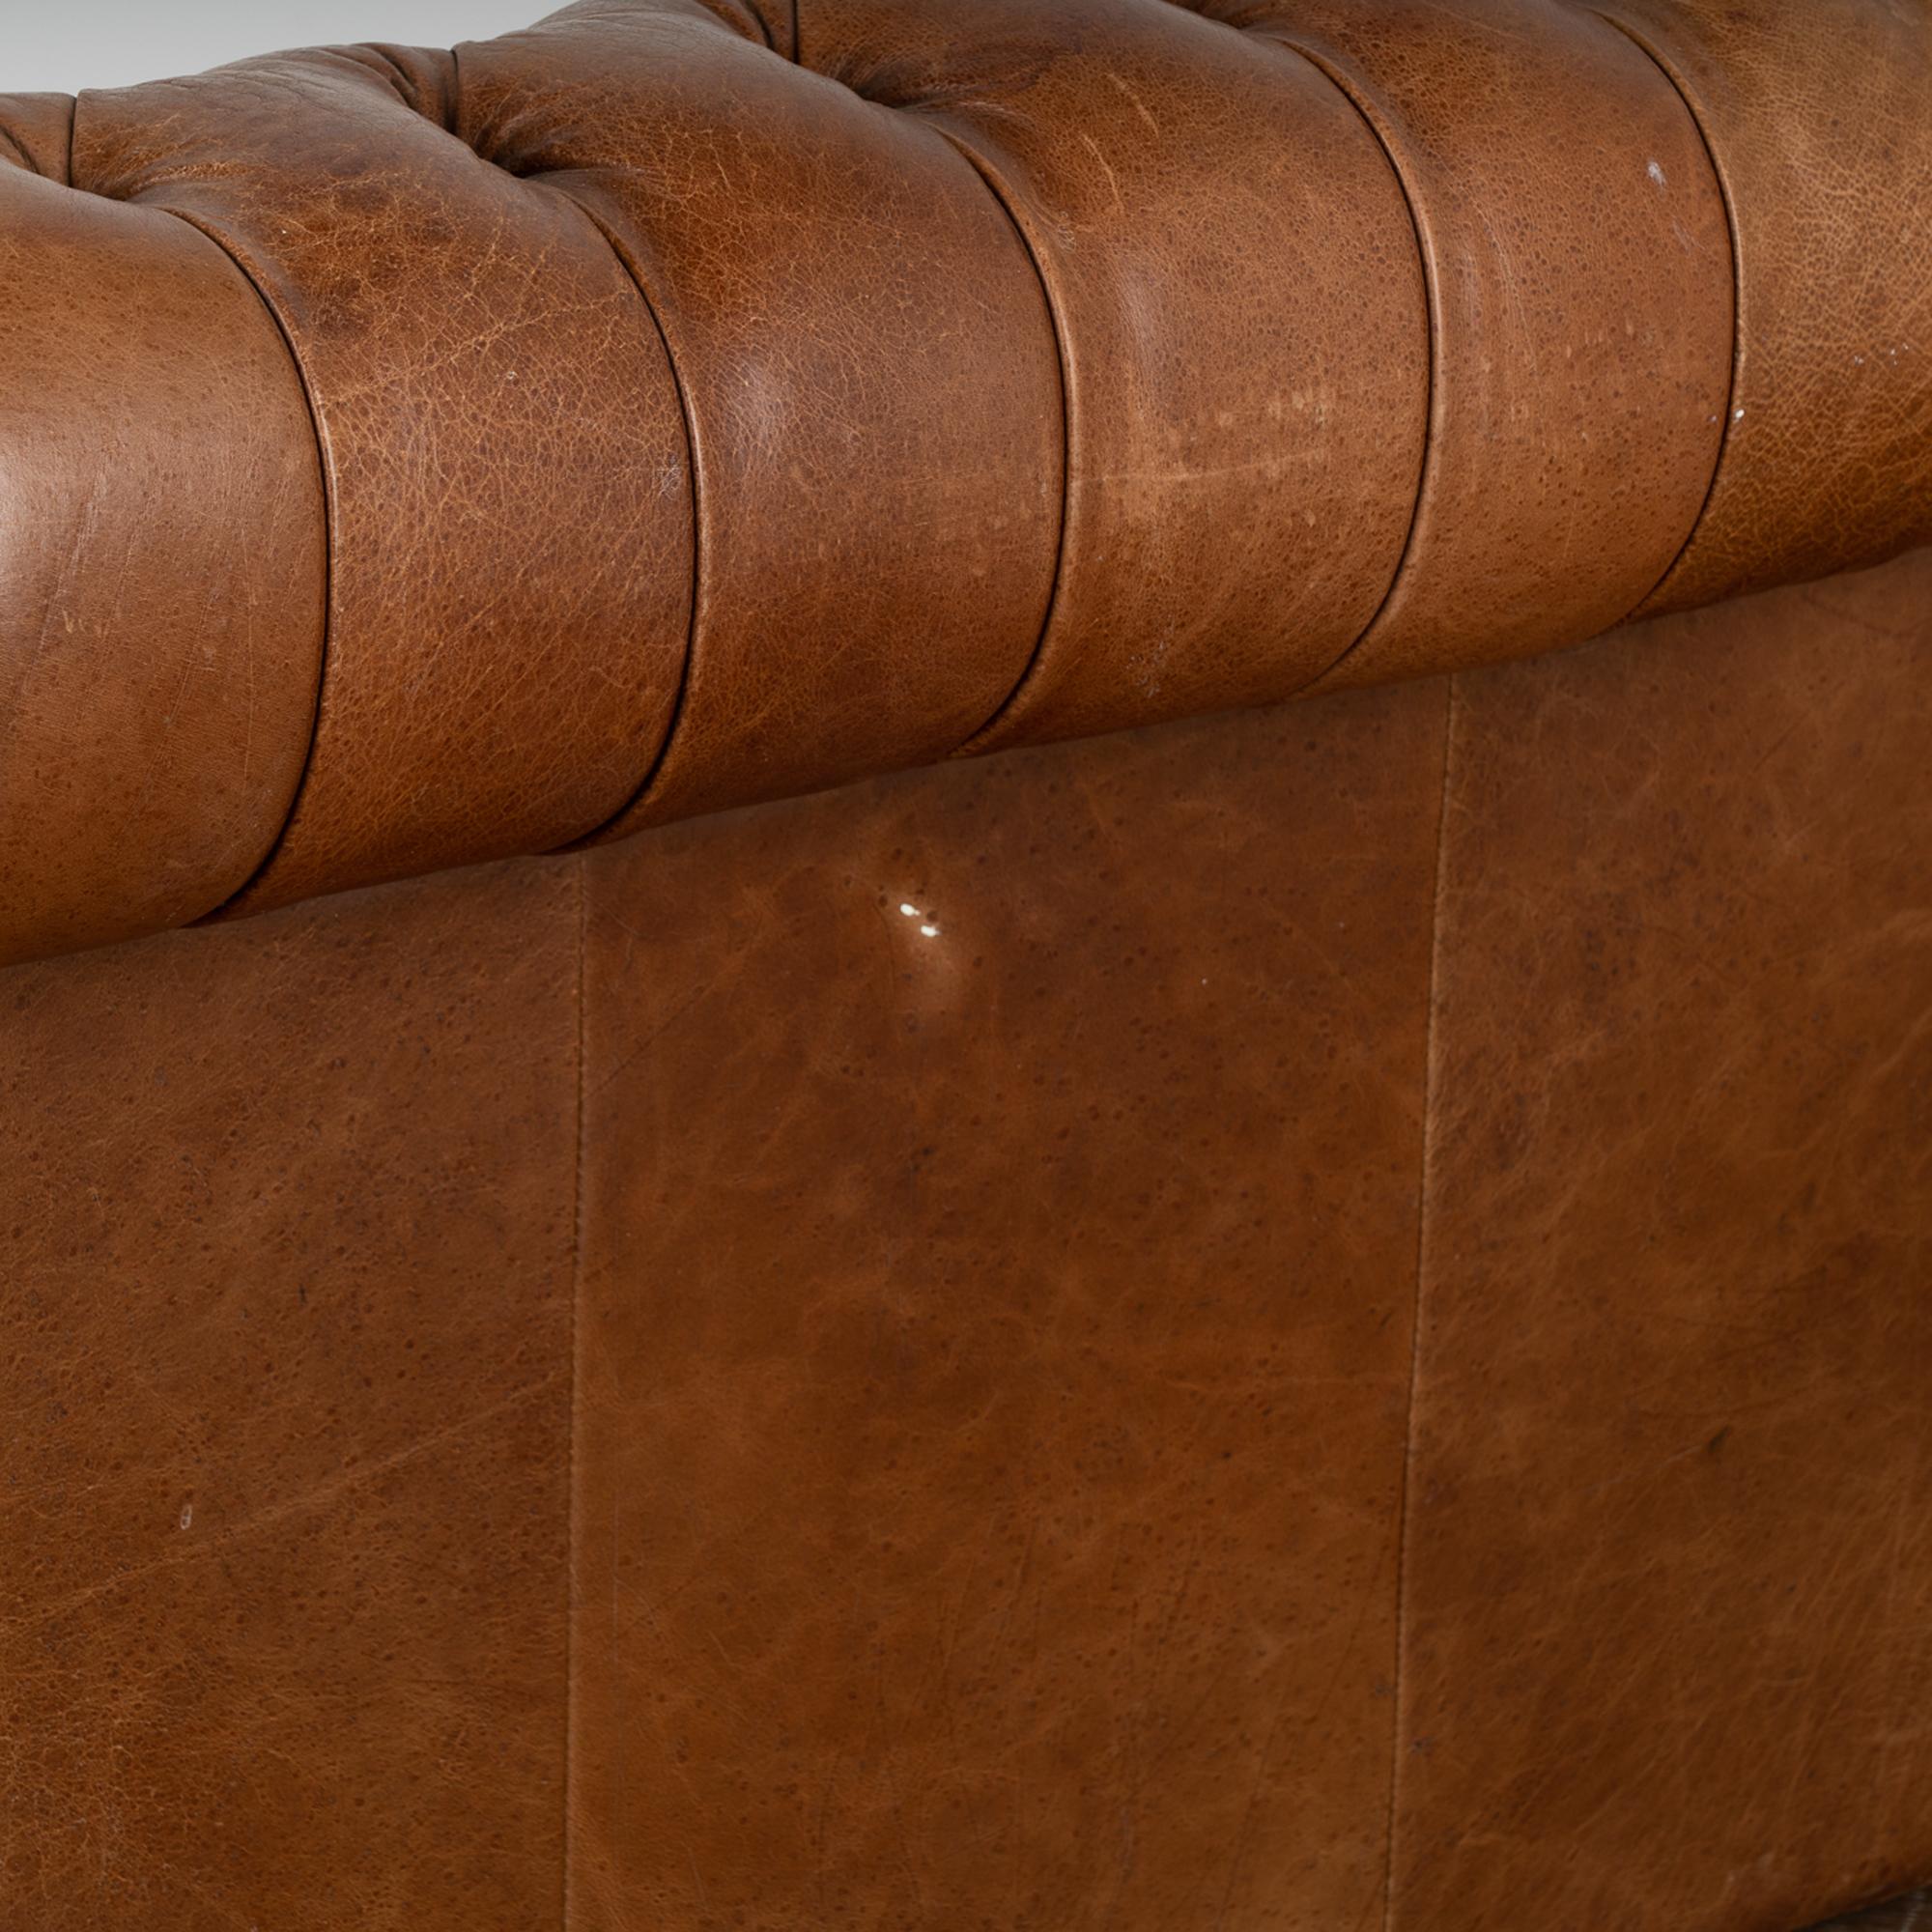 Vintage Brown Leather Three Seat Chesterfield Sofa, Denmark circa 1960-70 For Sale 5